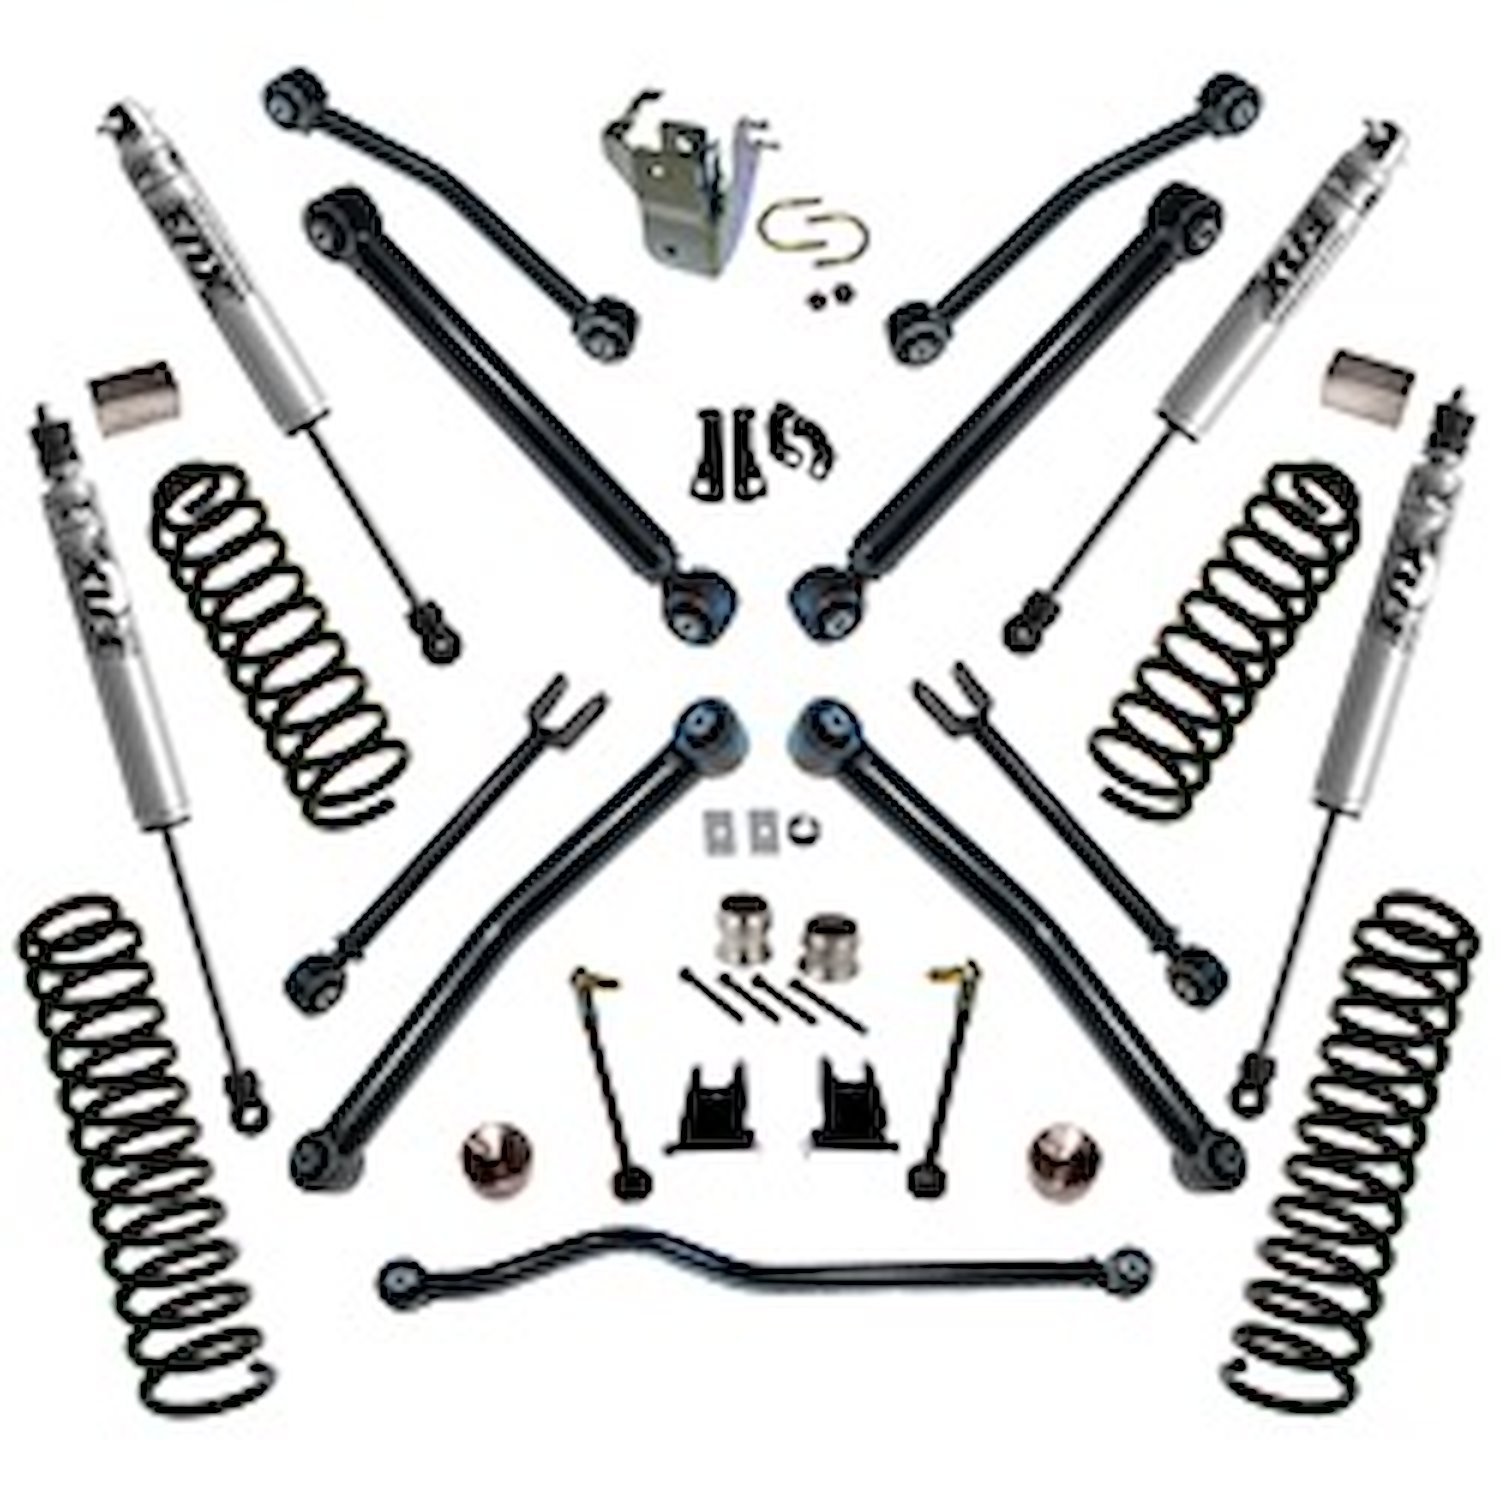 K997F Front and Rear Suspension Lift Kit, Lift Amount: 4 in. Front/4 in. Rear